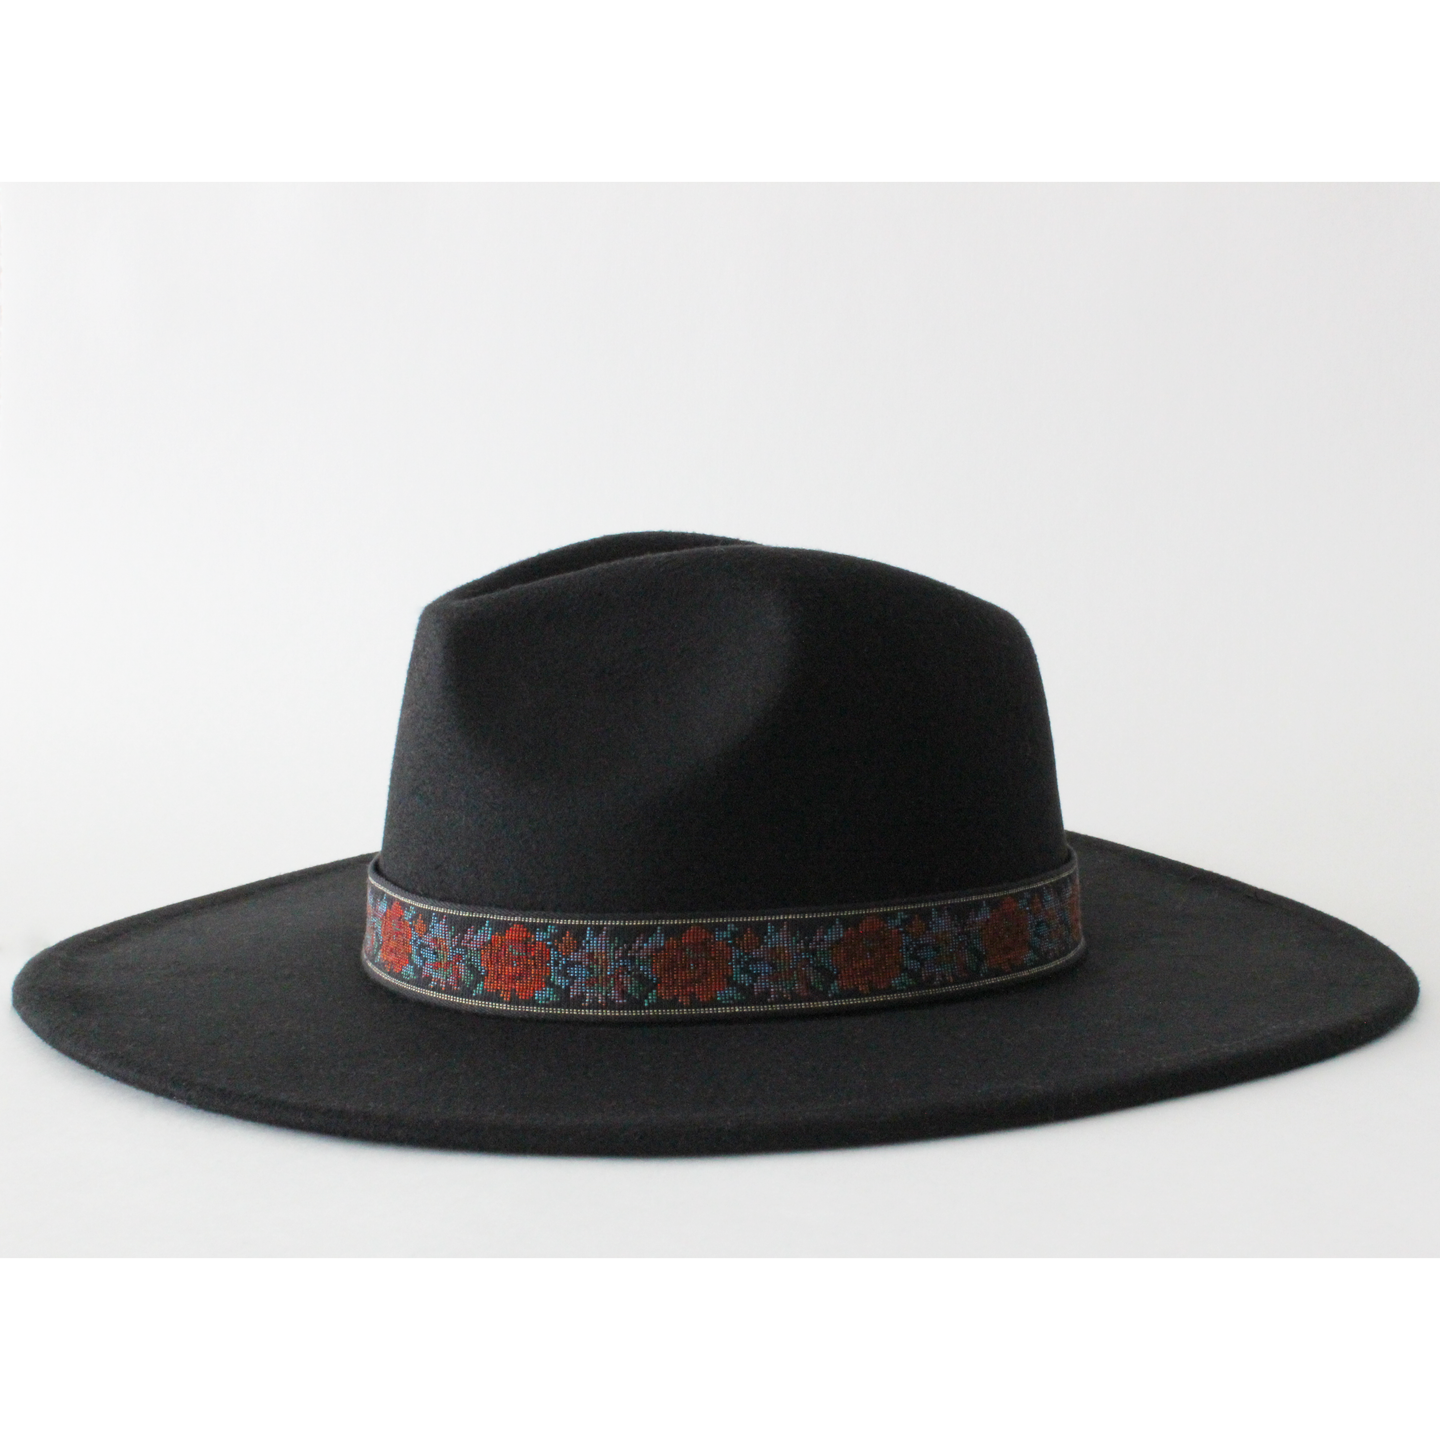 Women's Black Wide Brim Panama Felt hat with Red Rose Embroidered Ribbon Trim 